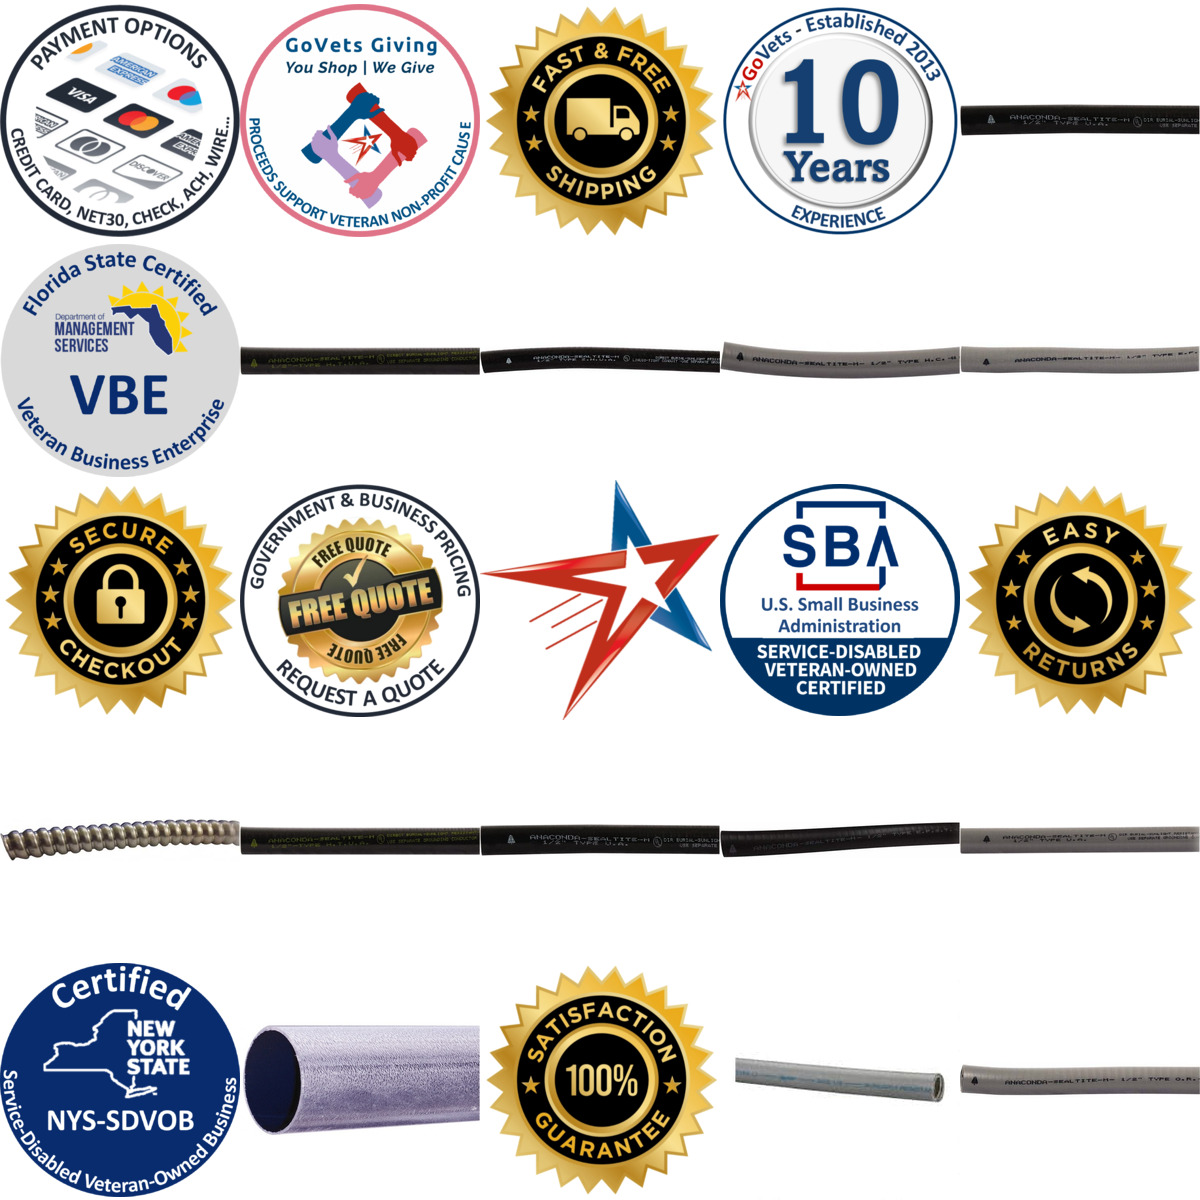 A selection of Conduits products on GoVets